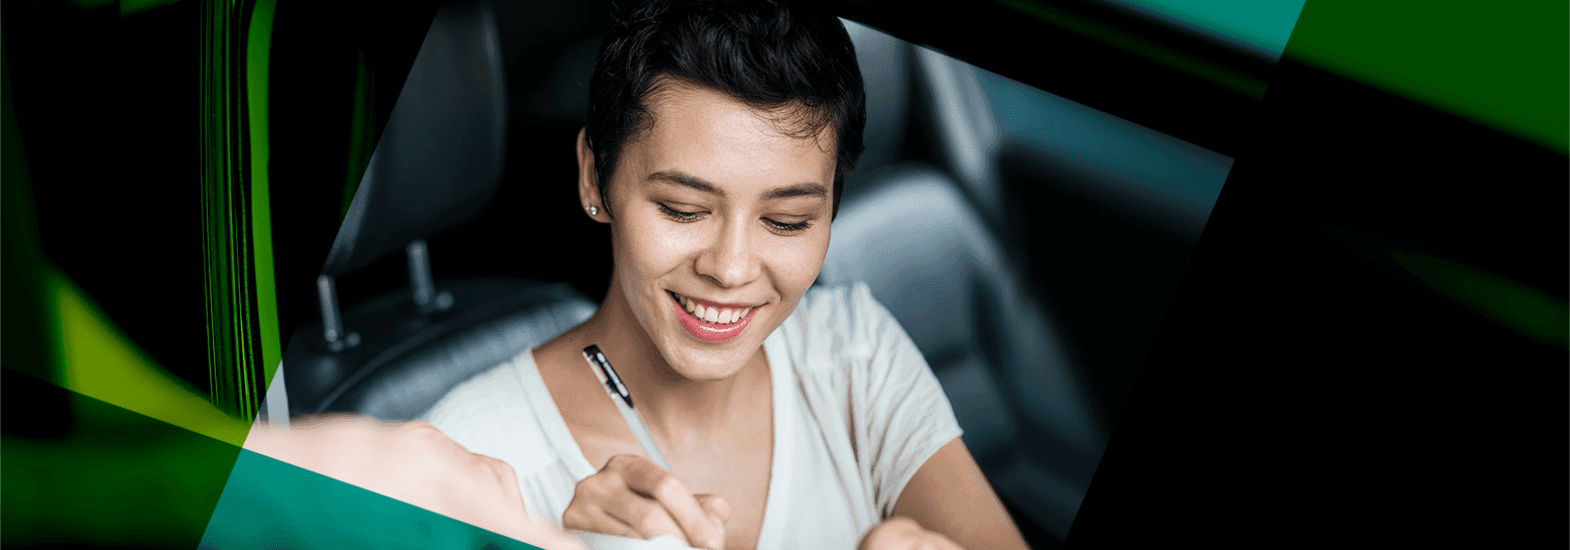 Let’s say a dealership has successfully overcome concerns of trust, fair pricing and convenience — and won back customers that had been previously lost to other providers. How easy is it to keep them coming back for service?</p>  <p>The numbers suggest it will take some work: shopper loyalty, according to a 2020 study conducted by the CDK Research and Insights Team, ranked dealerships (at 47 NPS) significantly behind independent service providers (at 63 NPS). </p>  <p>One strategy may be leveraging custo